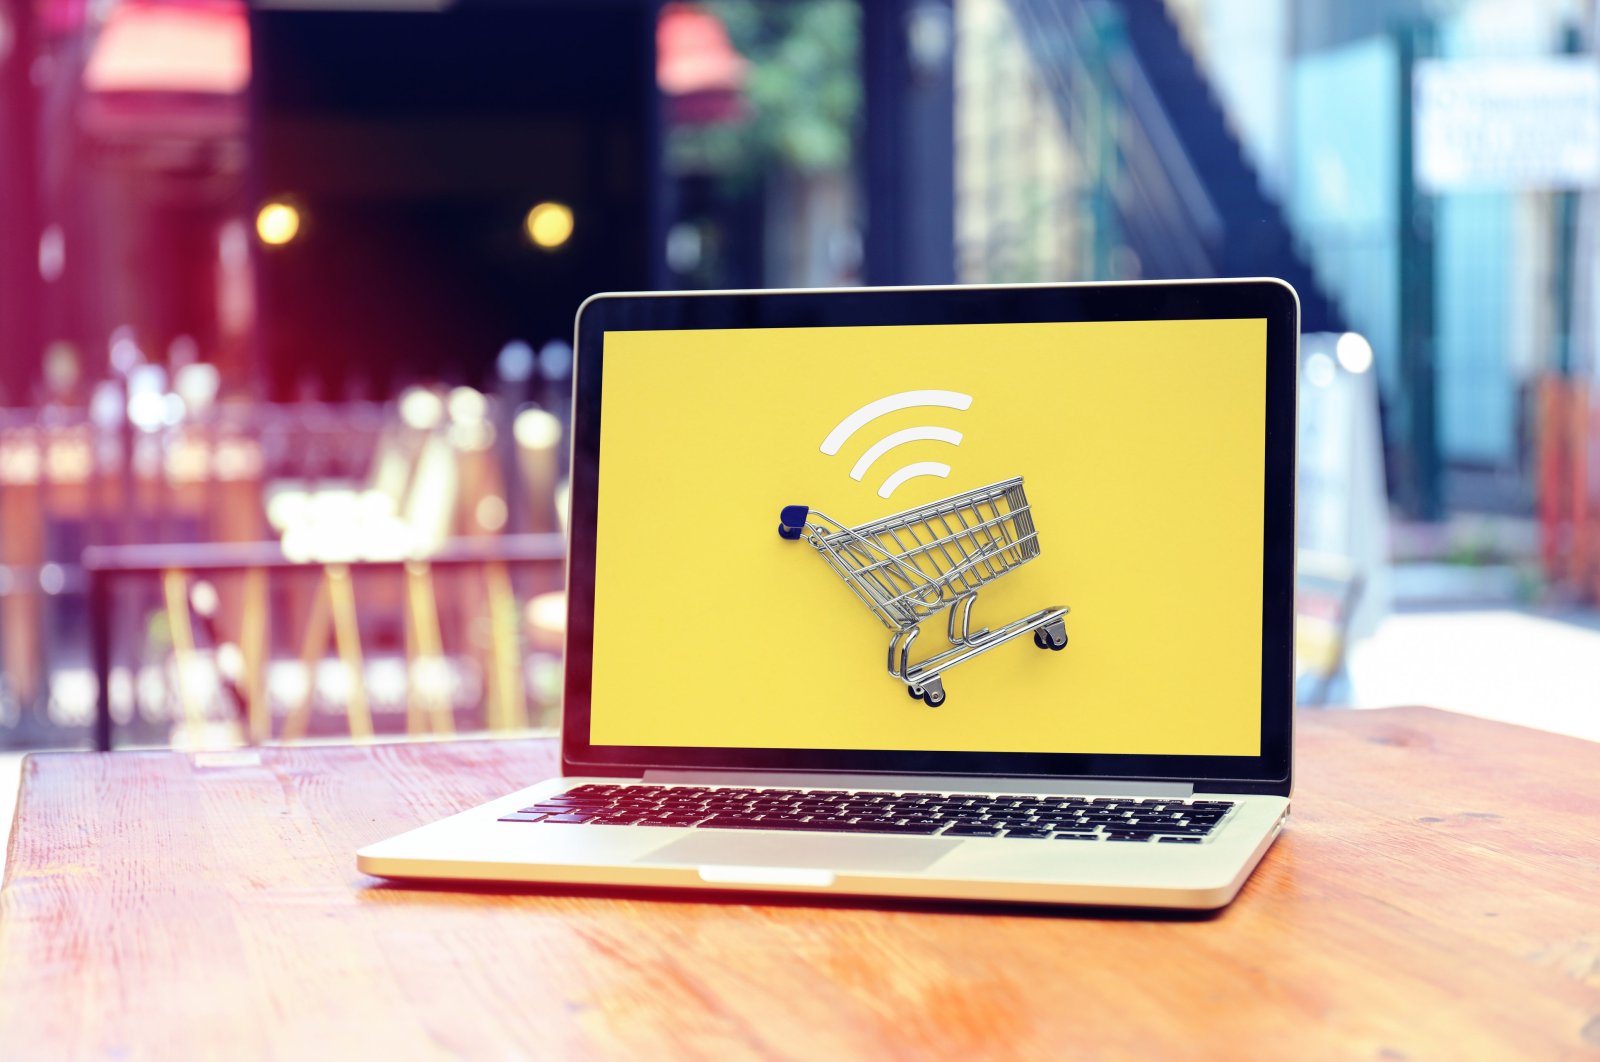 The e-commerce volume in Turkey reached TL 190 billion ($24.68 billion) by the end of 2019. (iStock Photo)